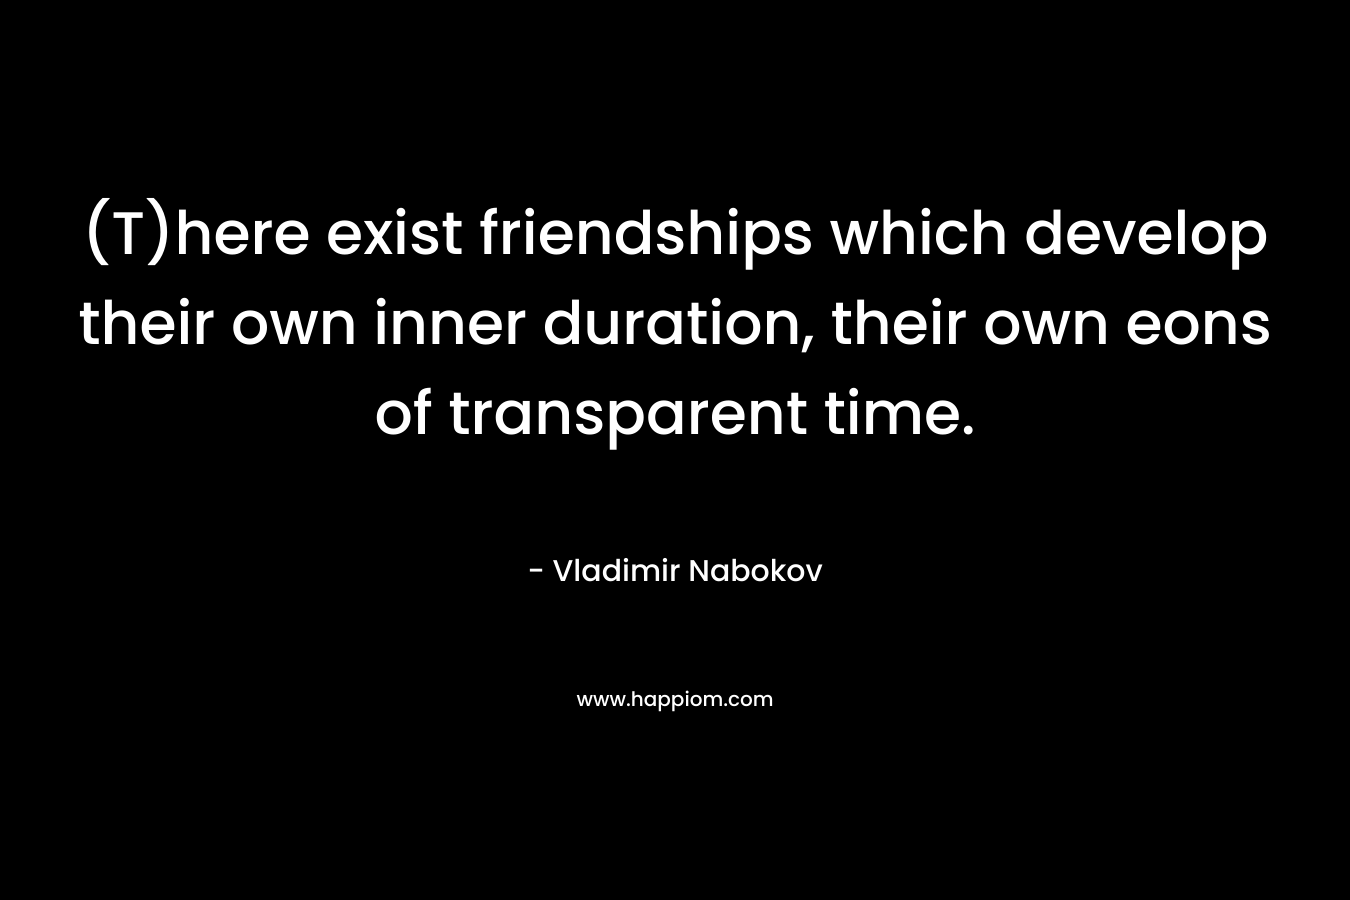 (T)here exist friendships which develop their own inner duration, their own eons of transparent time.